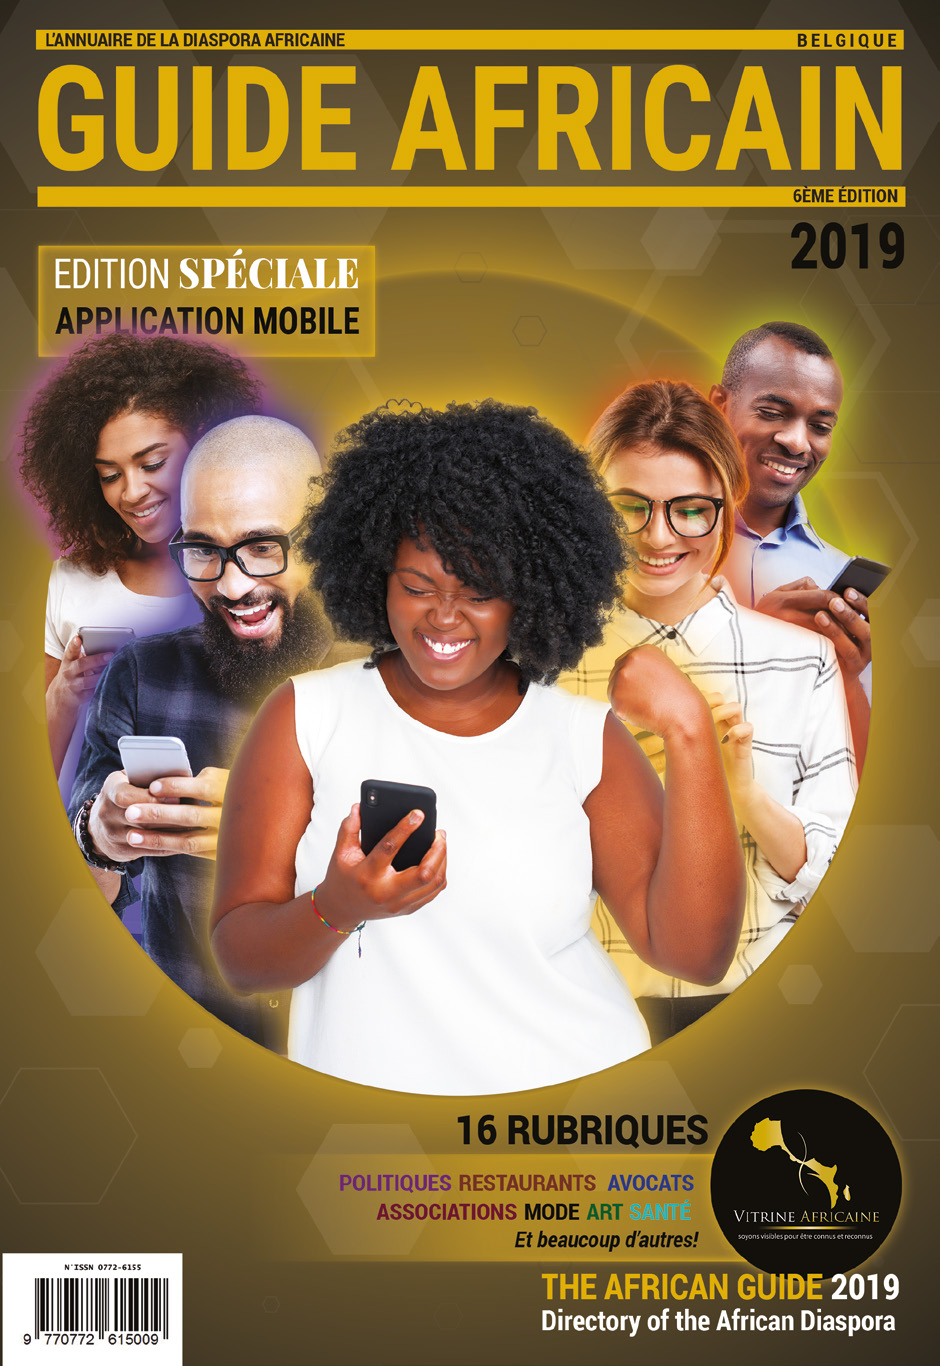 LE GUIDE AFRICAIN 6EME EDITION